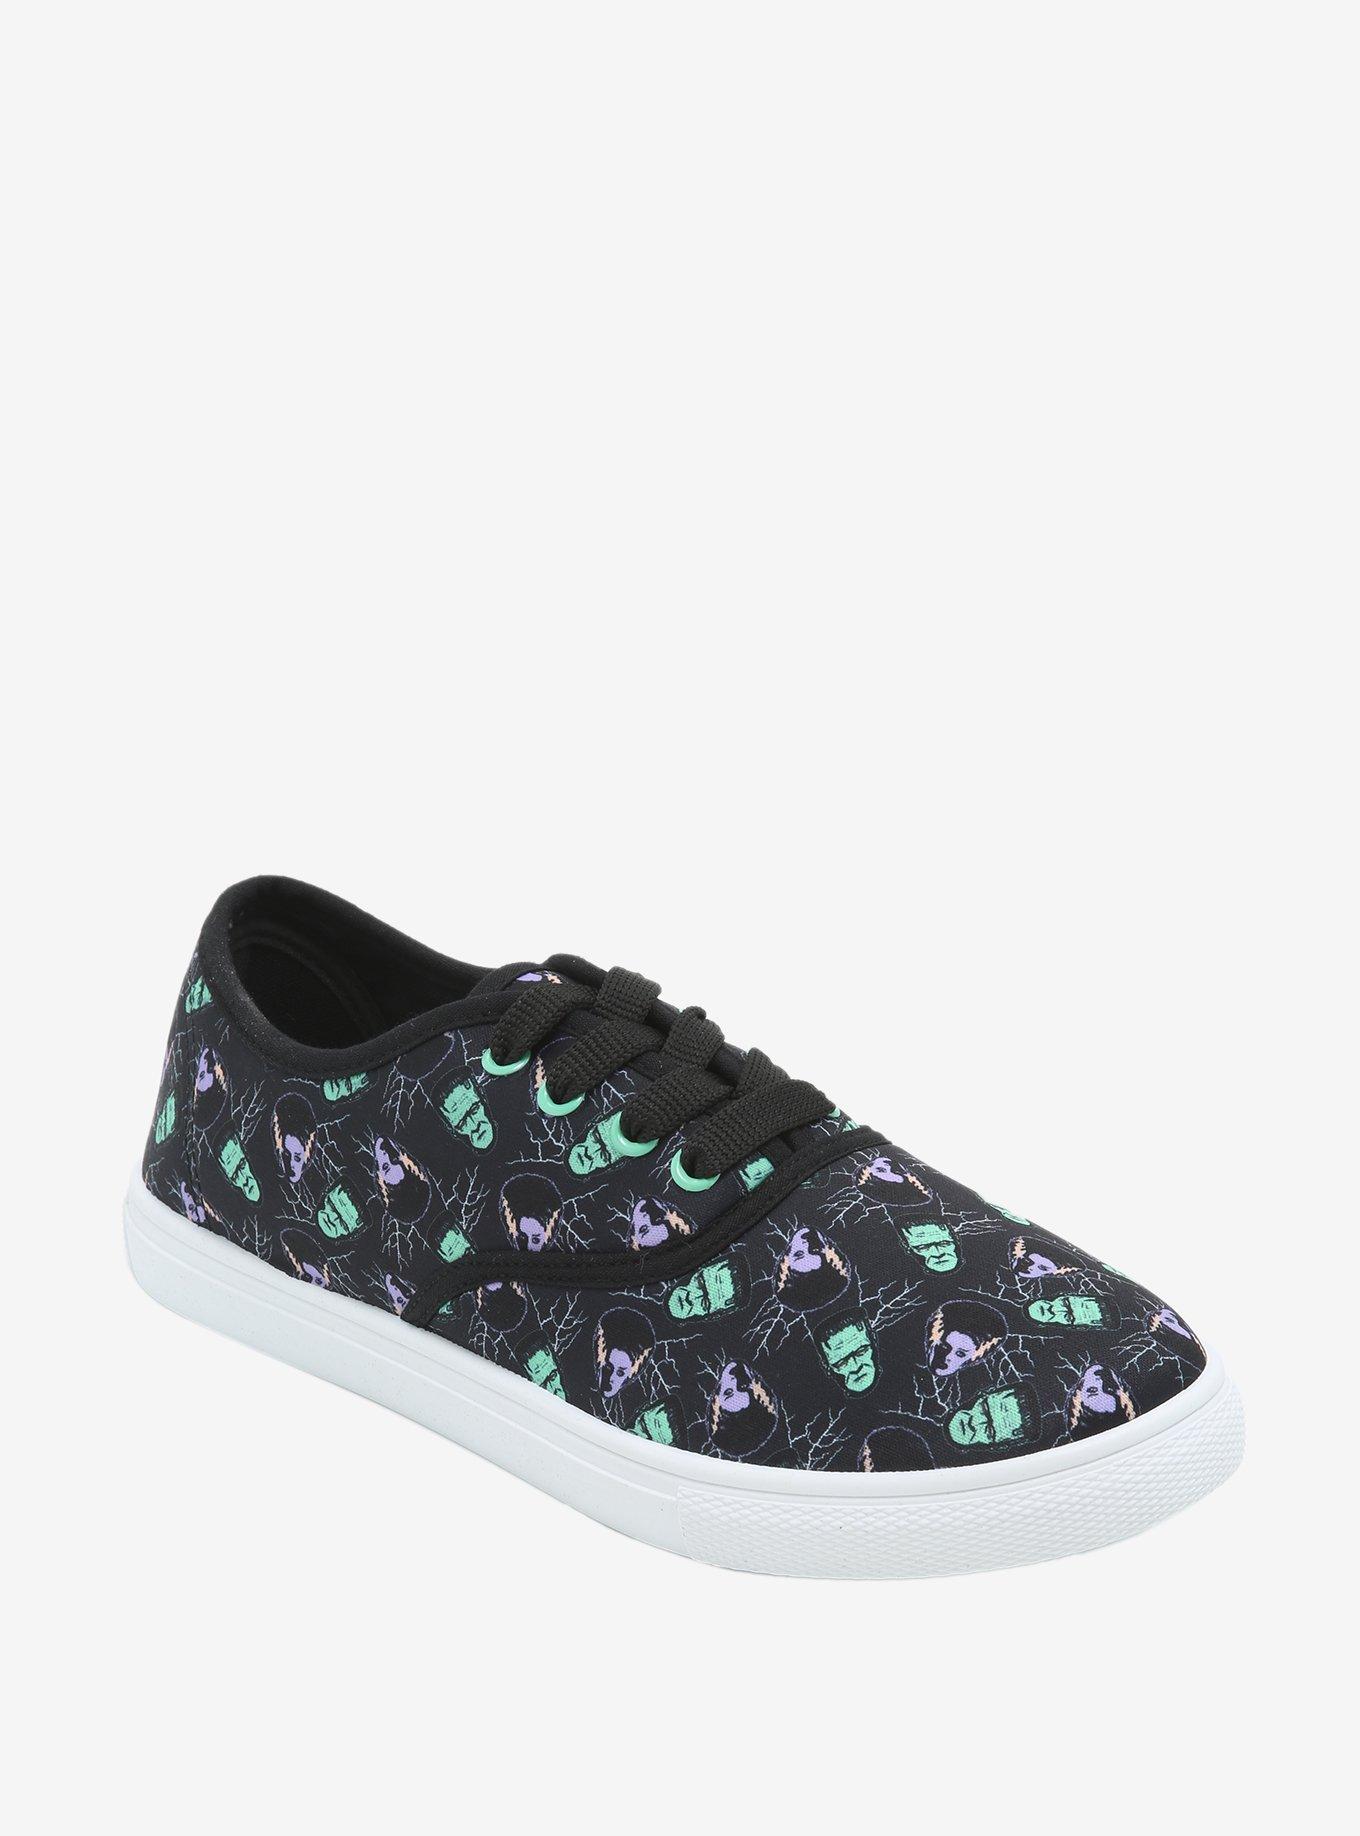 Universal Monsters Frankenstein Lace-Up Canvas Sneakers | Hot Topic